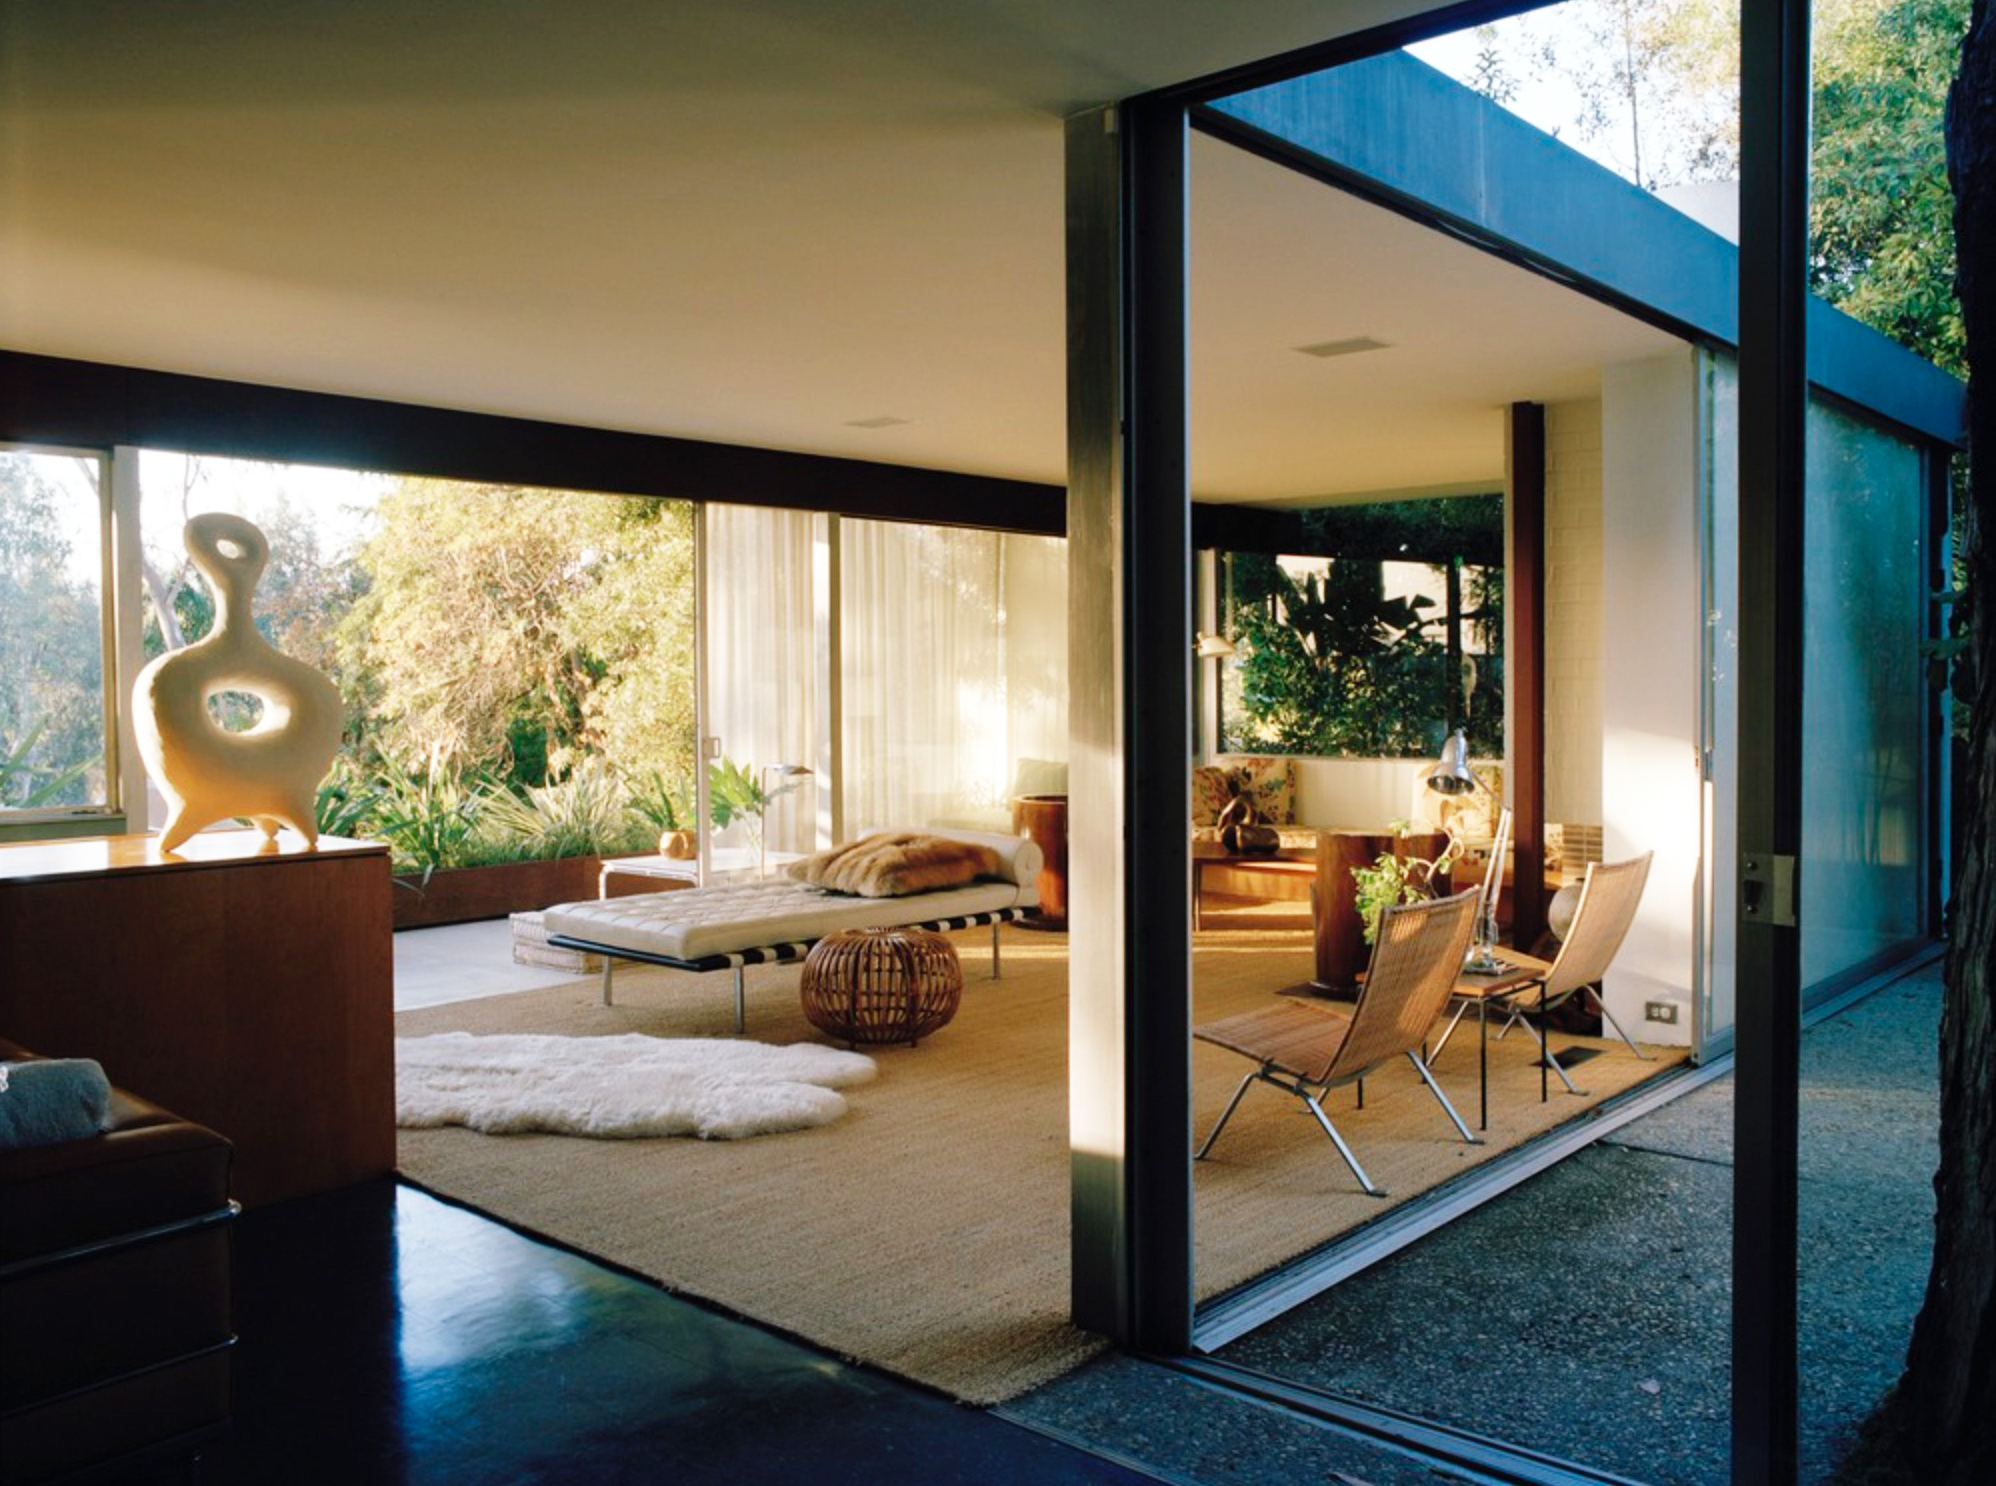 Netto Residence, Silver Lake, Los Angeles. As featured in Interiors: The Greatest Rooms of the Century